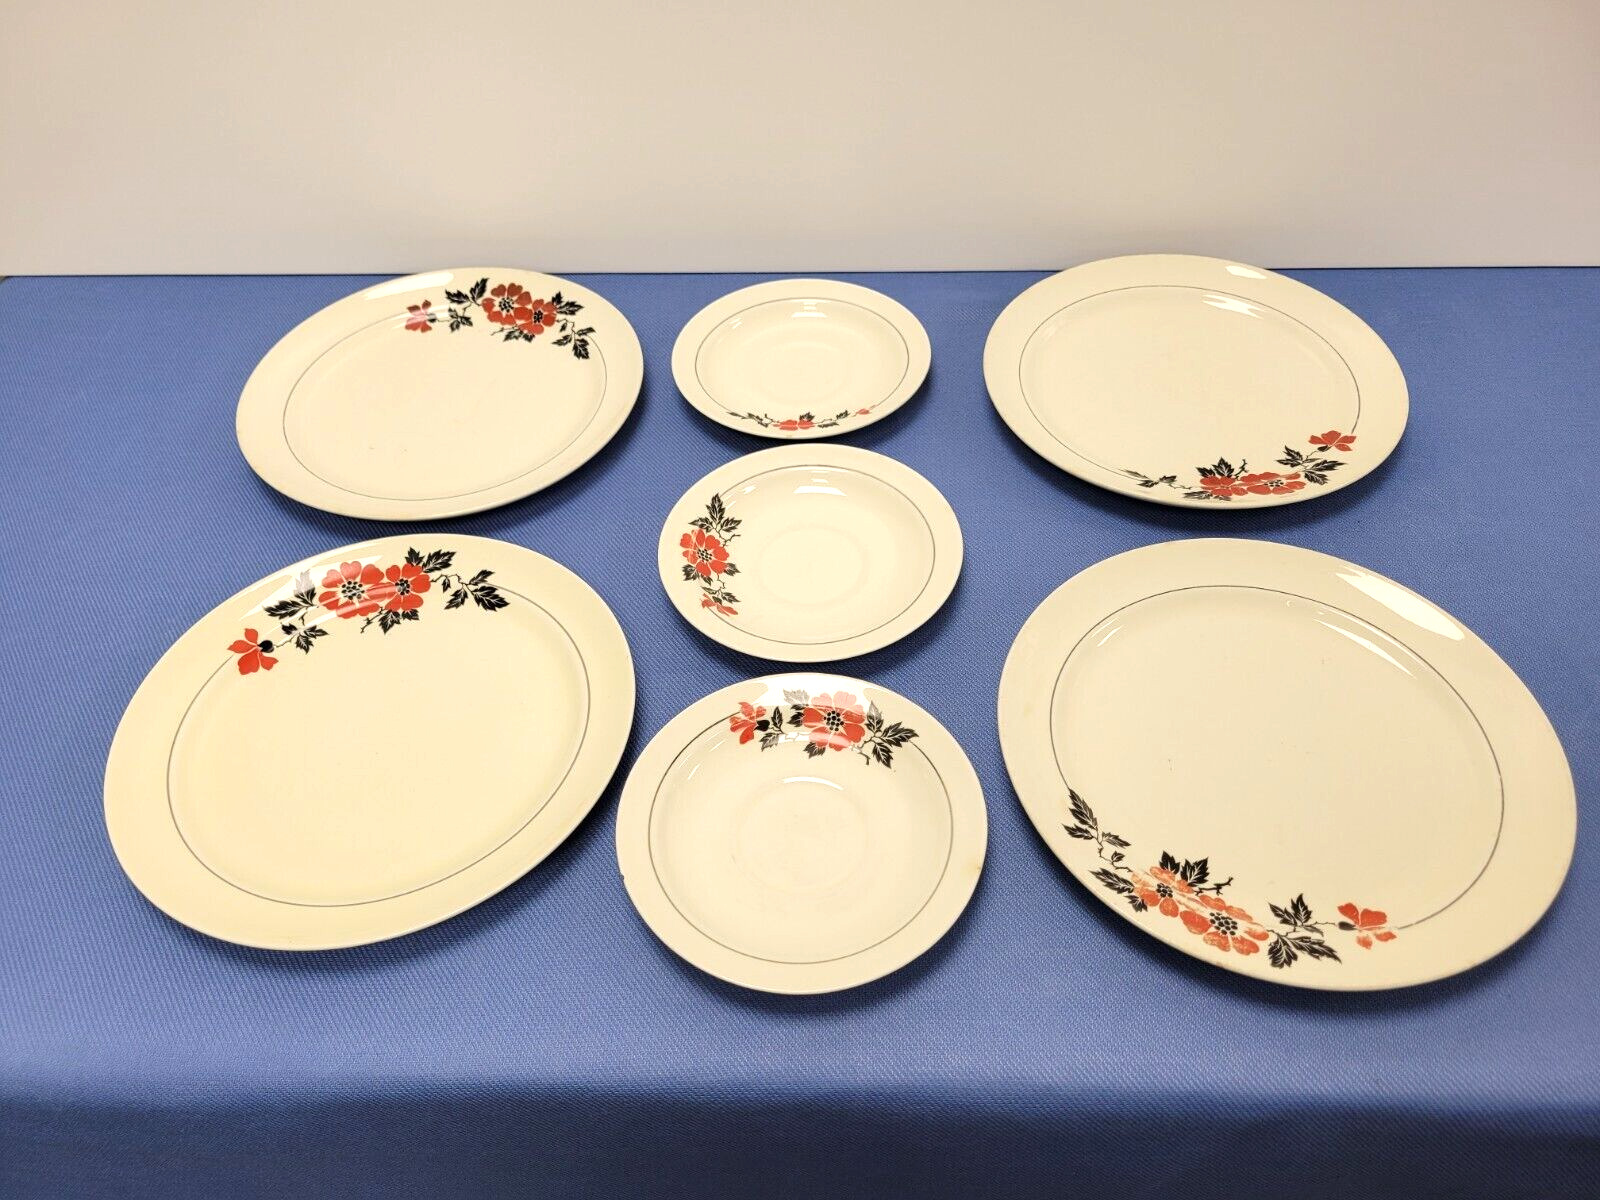 Vintage Hall Red Poppy Dinner Plates (4) & Small Plates Saucers (3)